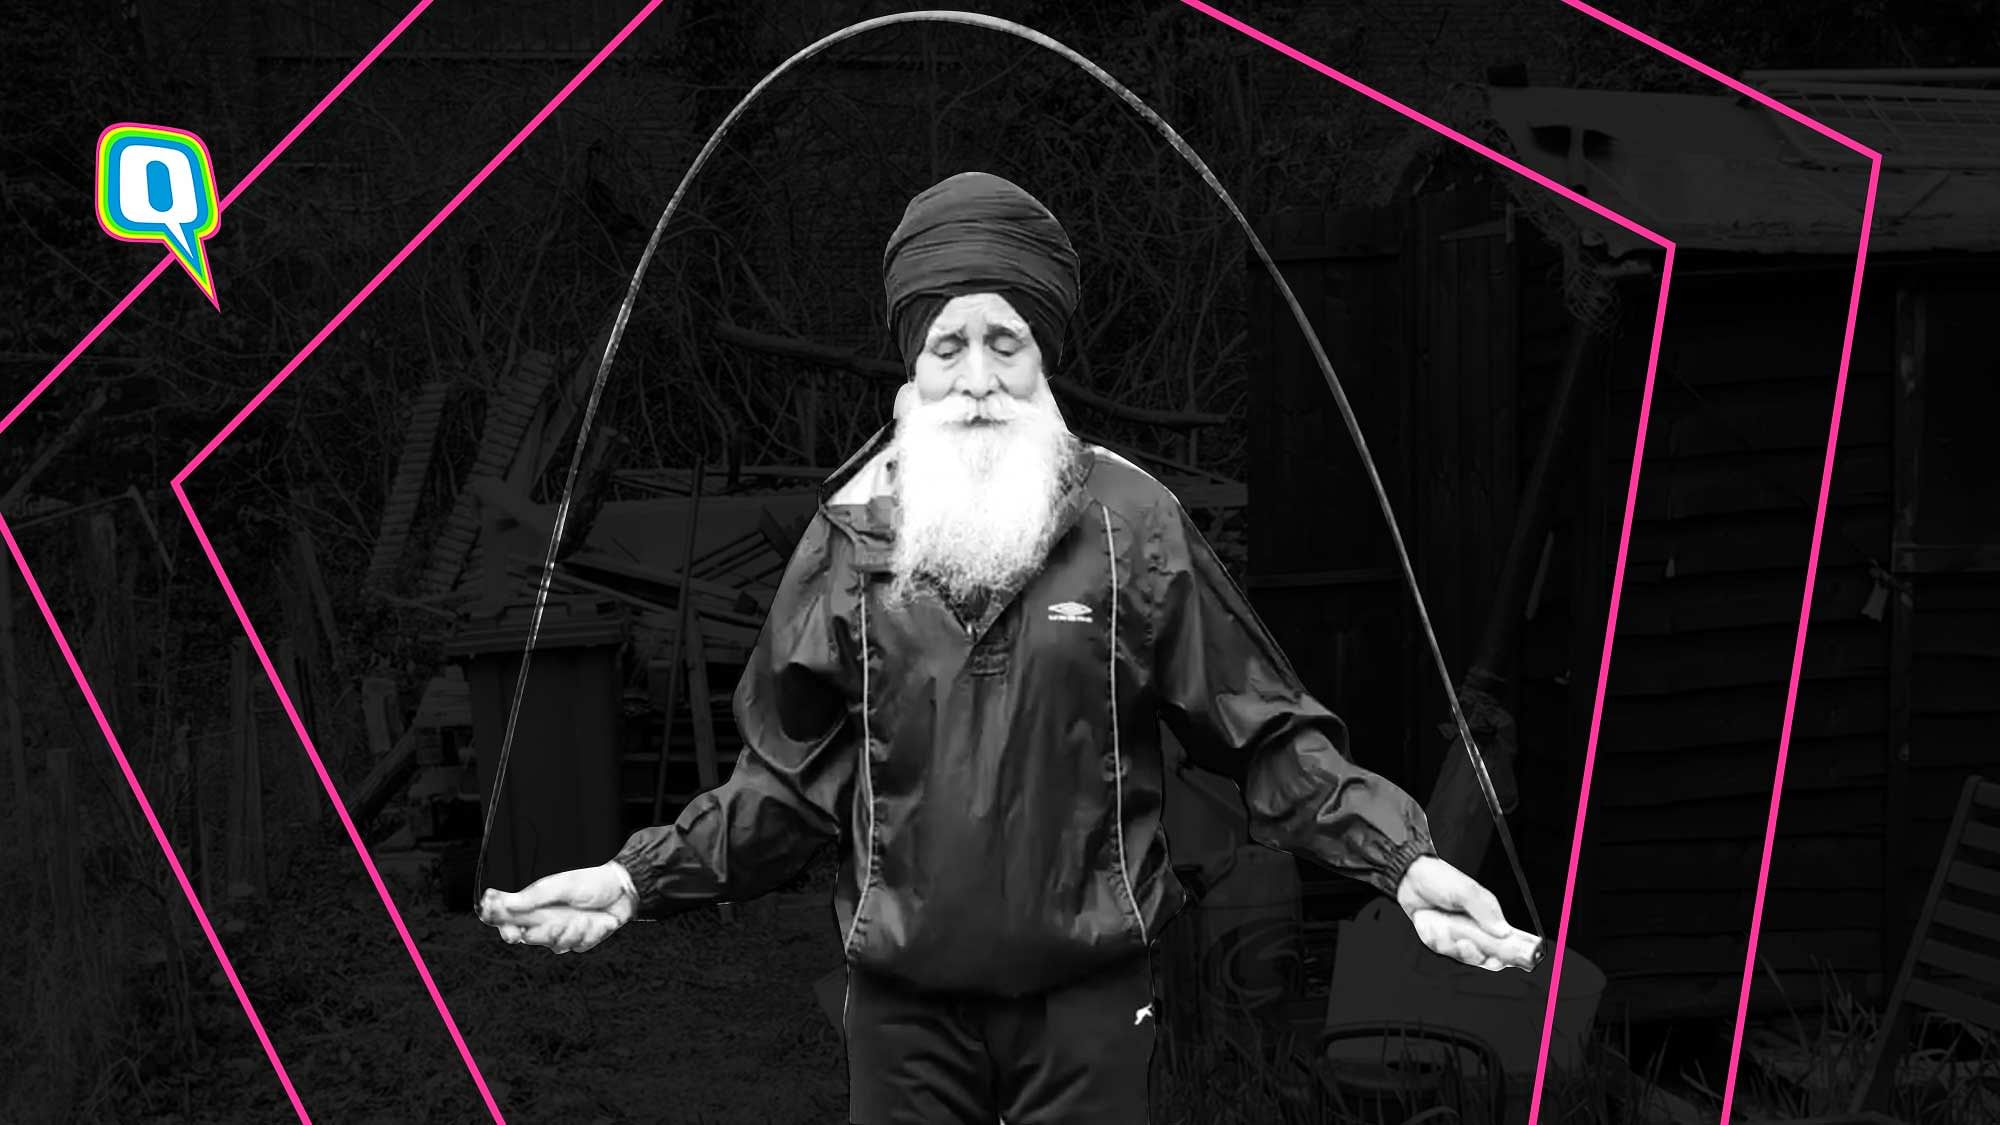 73-year-old Rajinder’s energy will inspire you!